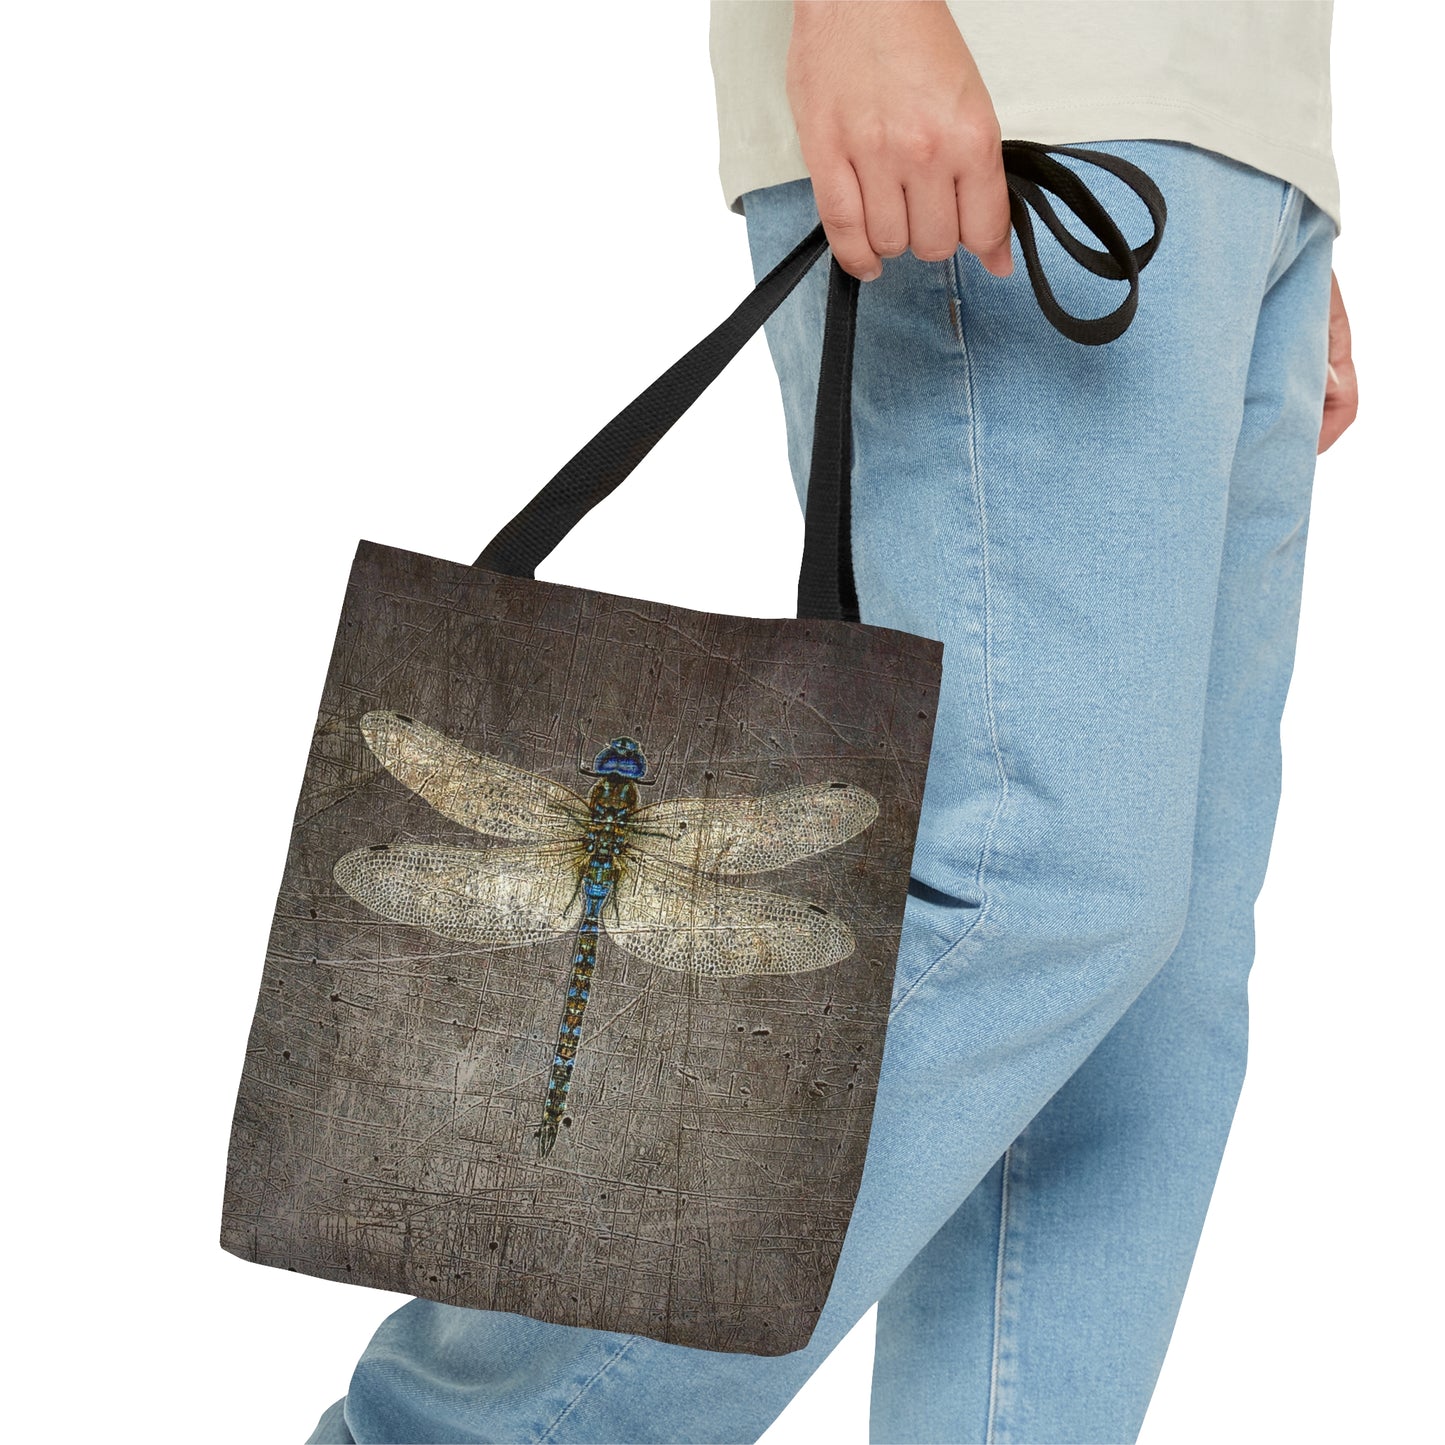 Dragonfly on Distressed Gray Stone Printed on Tote Bag small with model